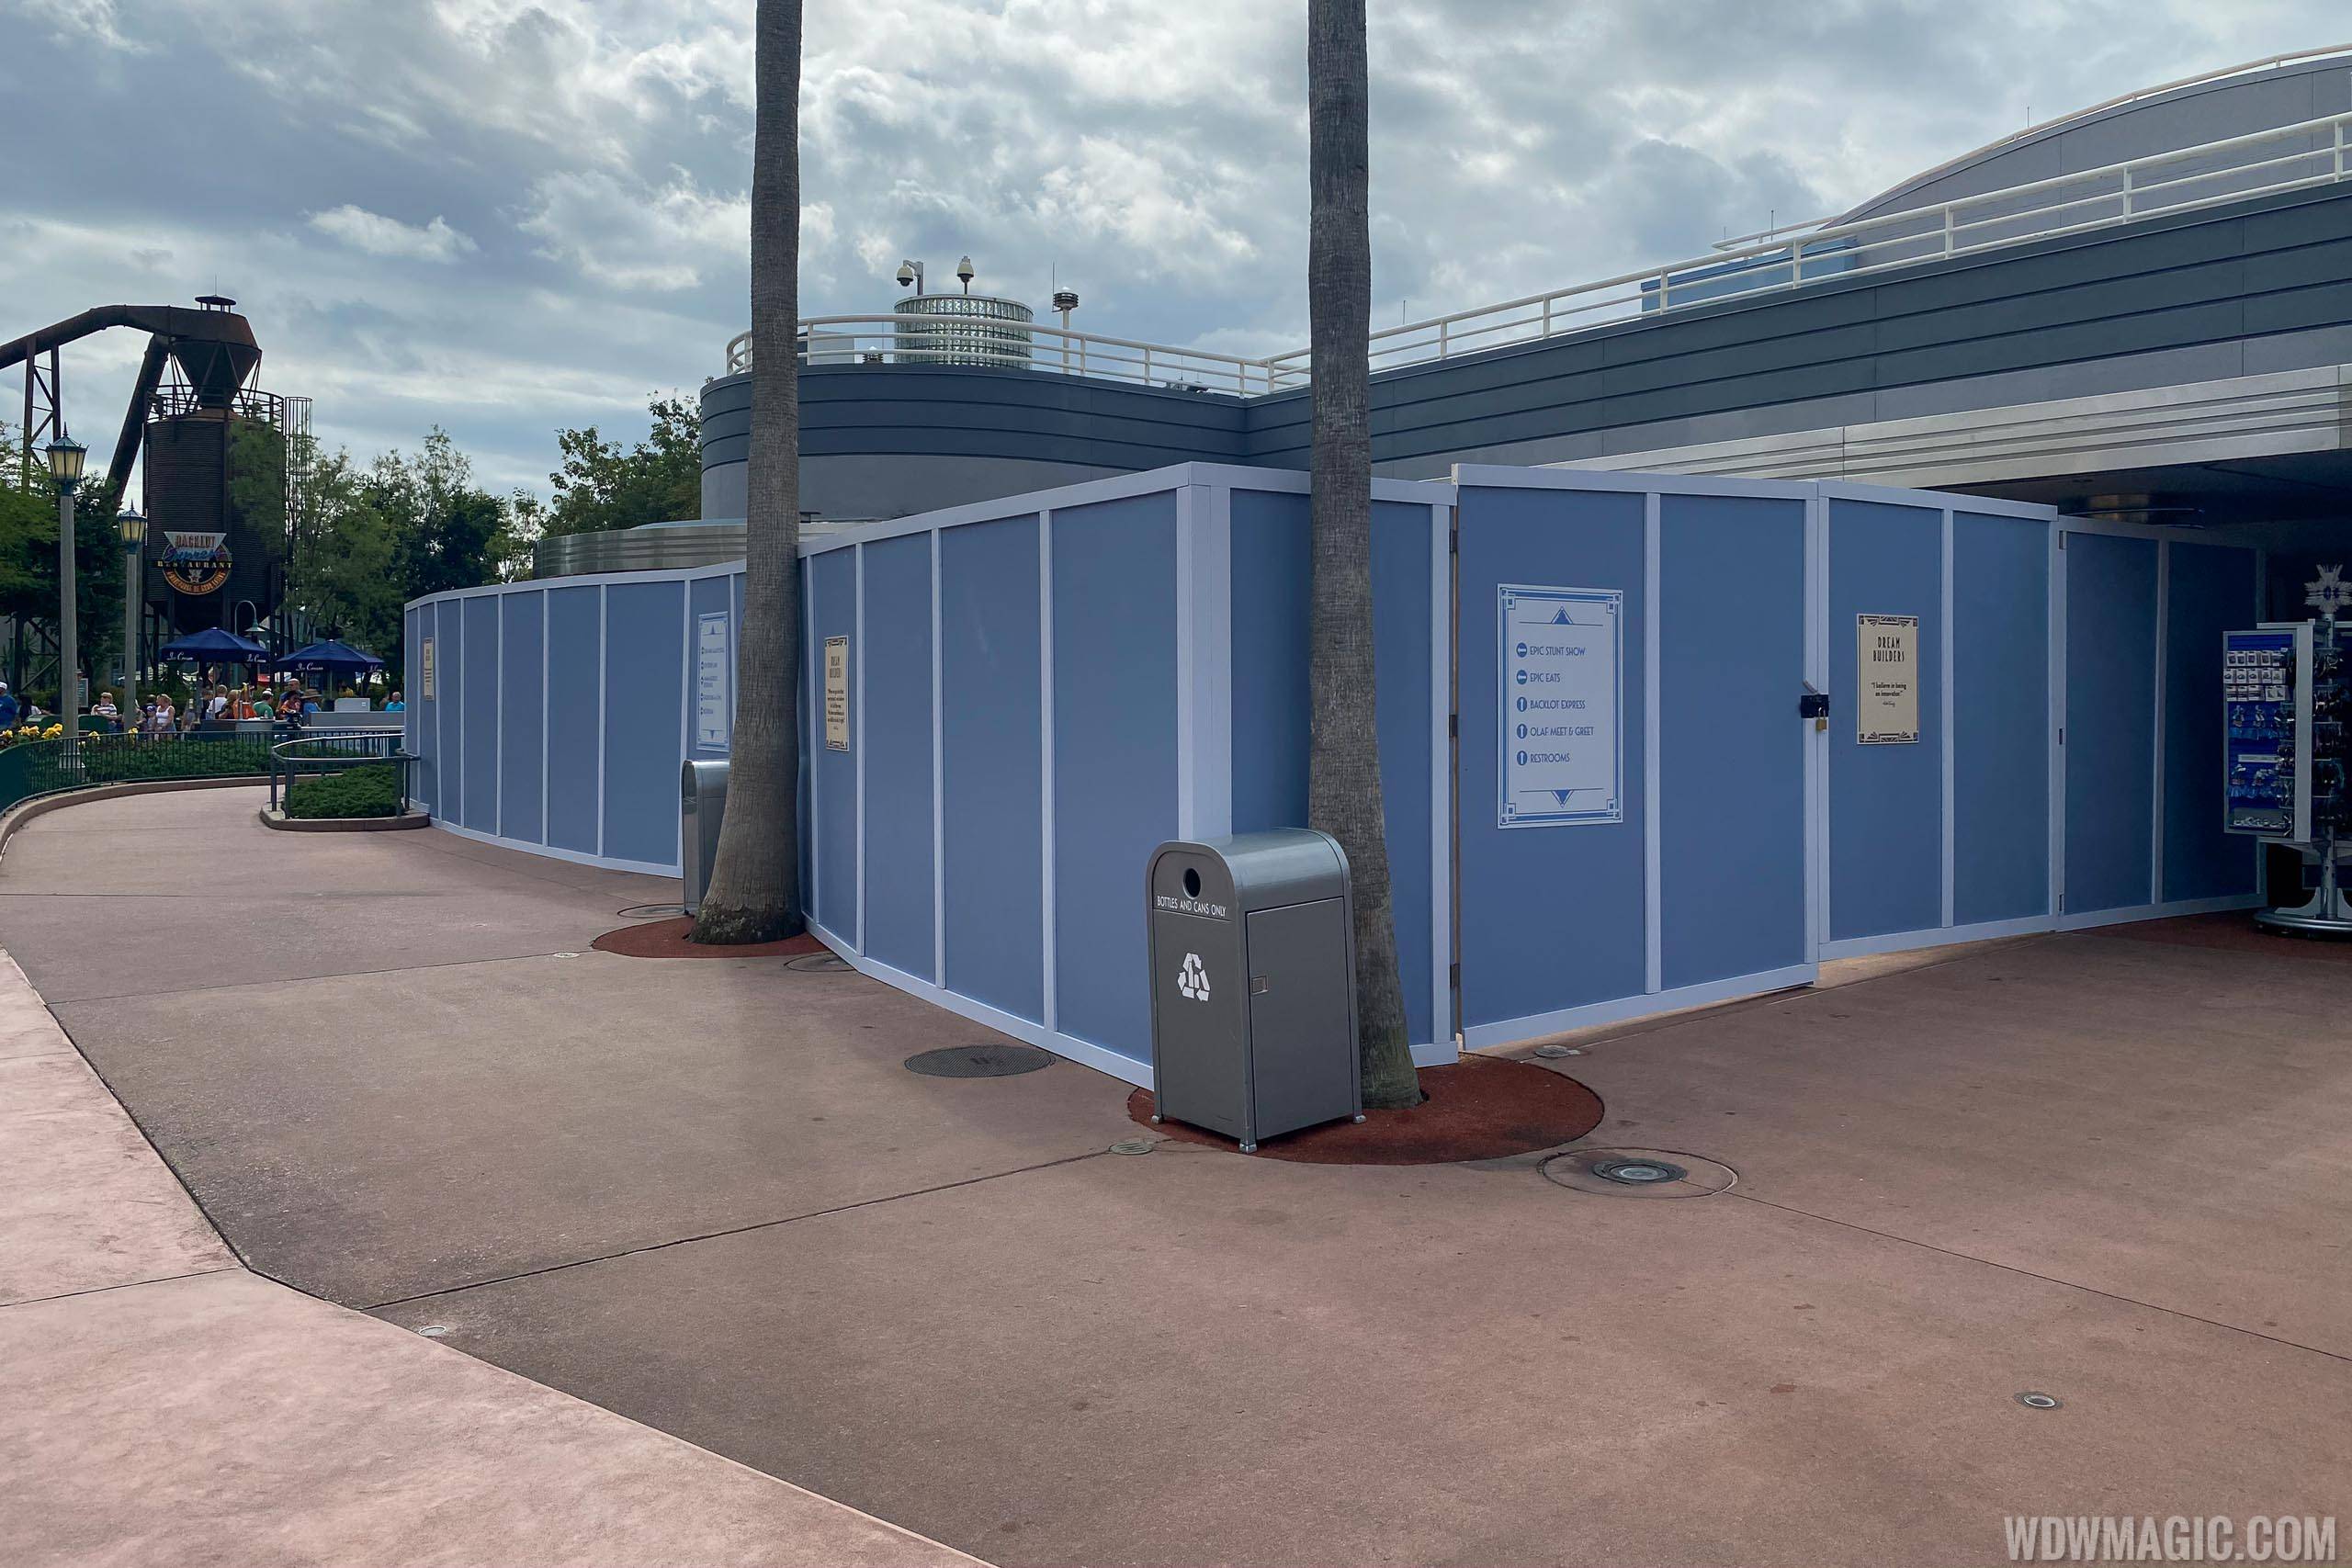 PHOTOS - Construction walls go up around former Sounds Dangerous building for upcoming Mickey Shorts Theater